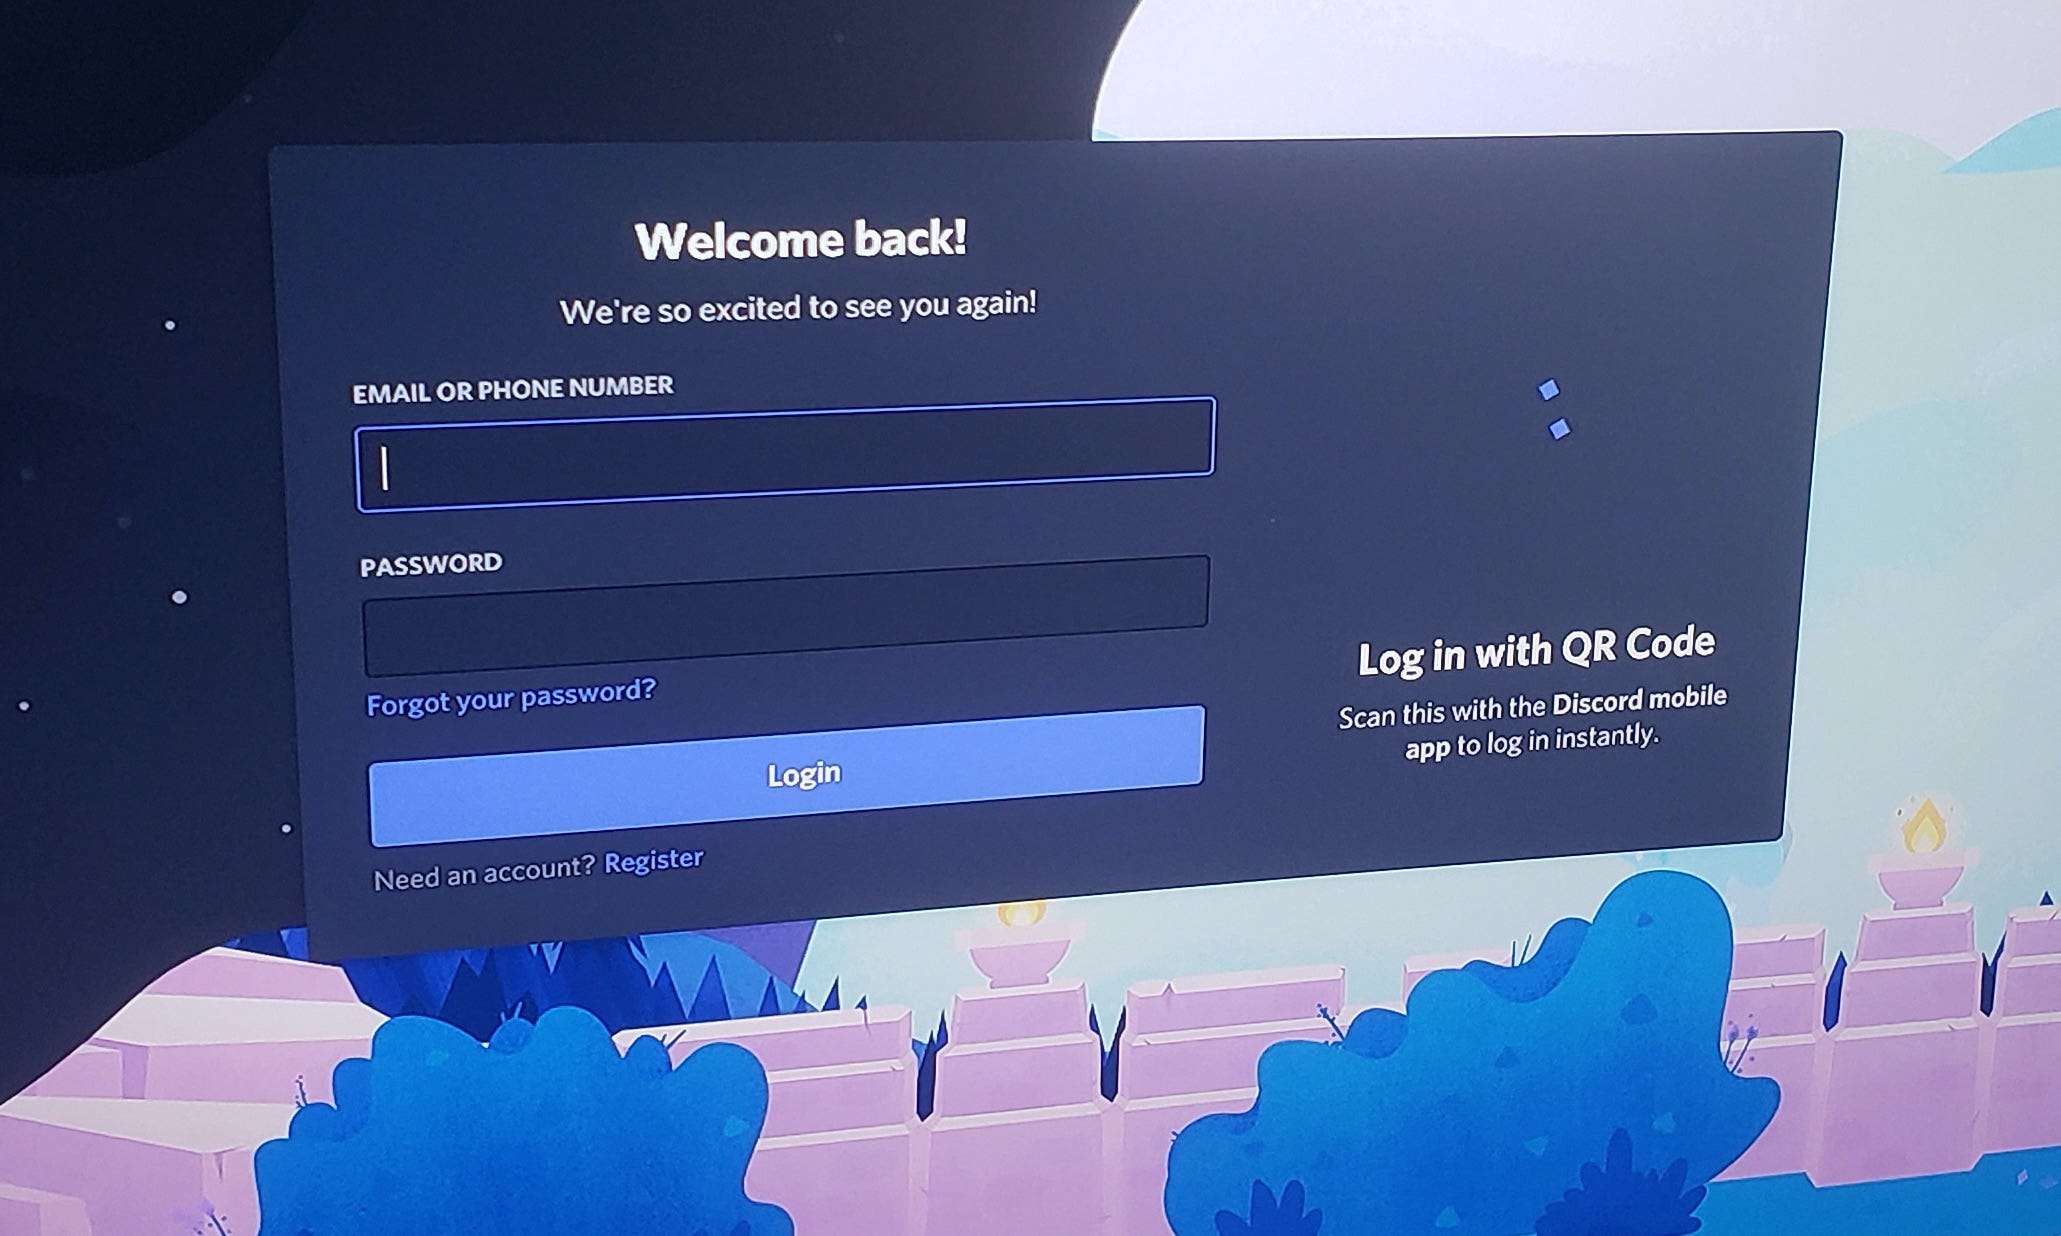 Microsoft and Discord Team Up to Connect Gamers Across Xbox Live